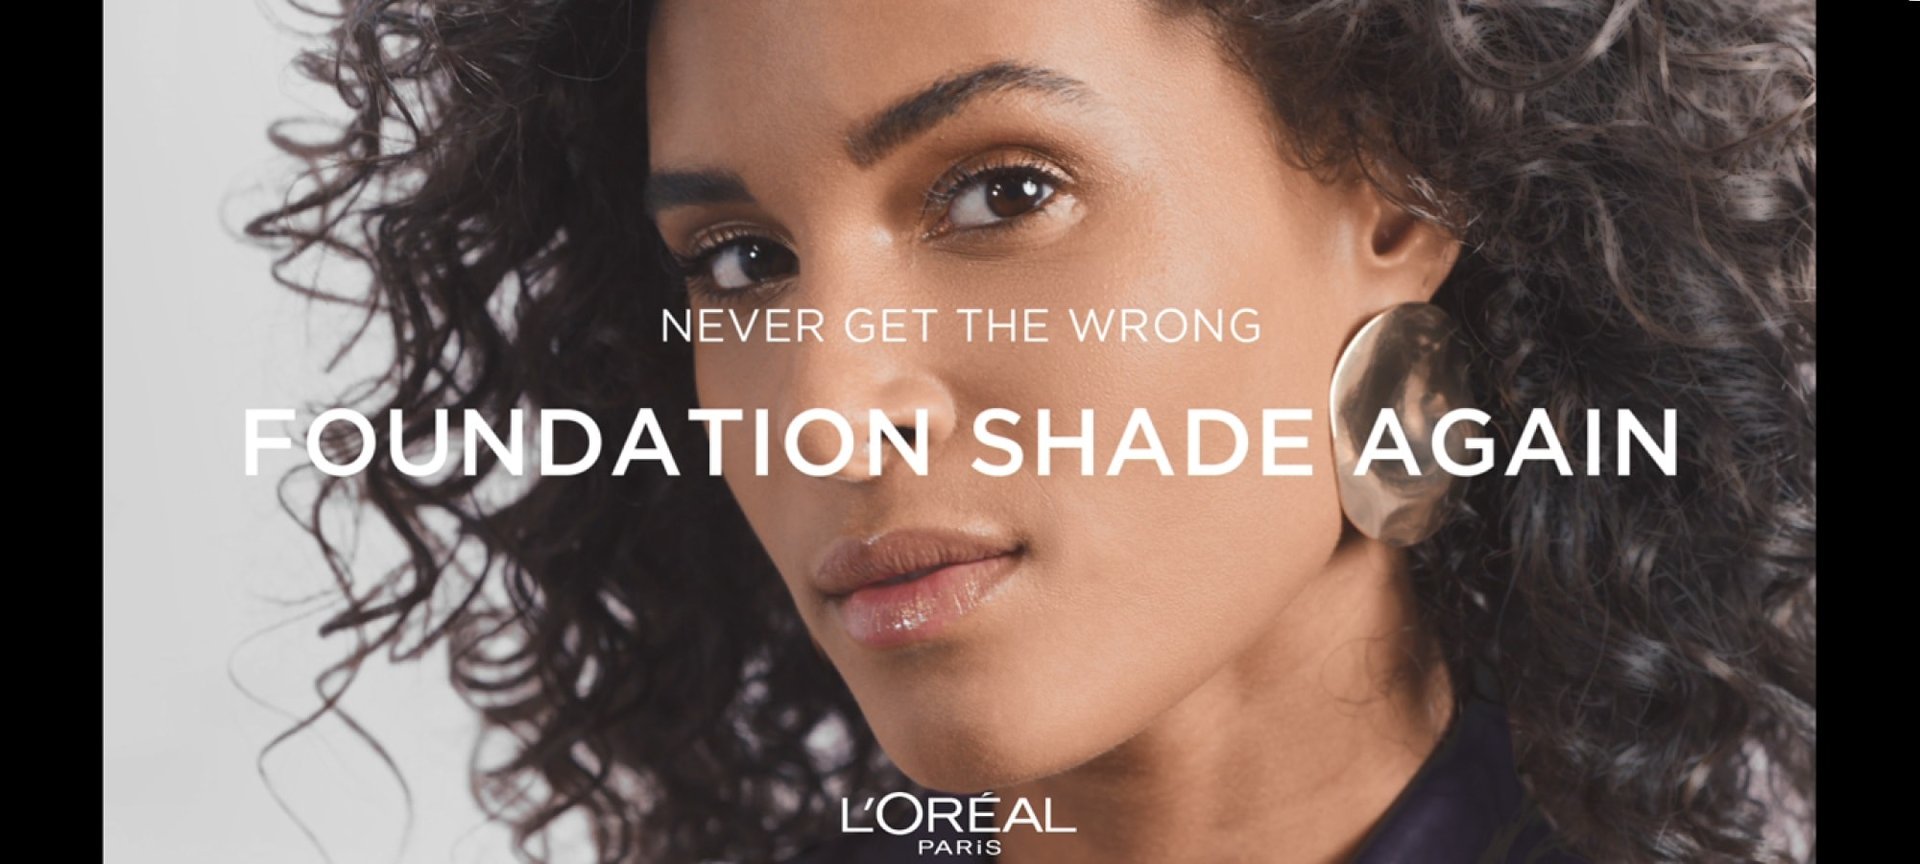 Match My Shade The first virtual shade finder by L'Oréal Paris